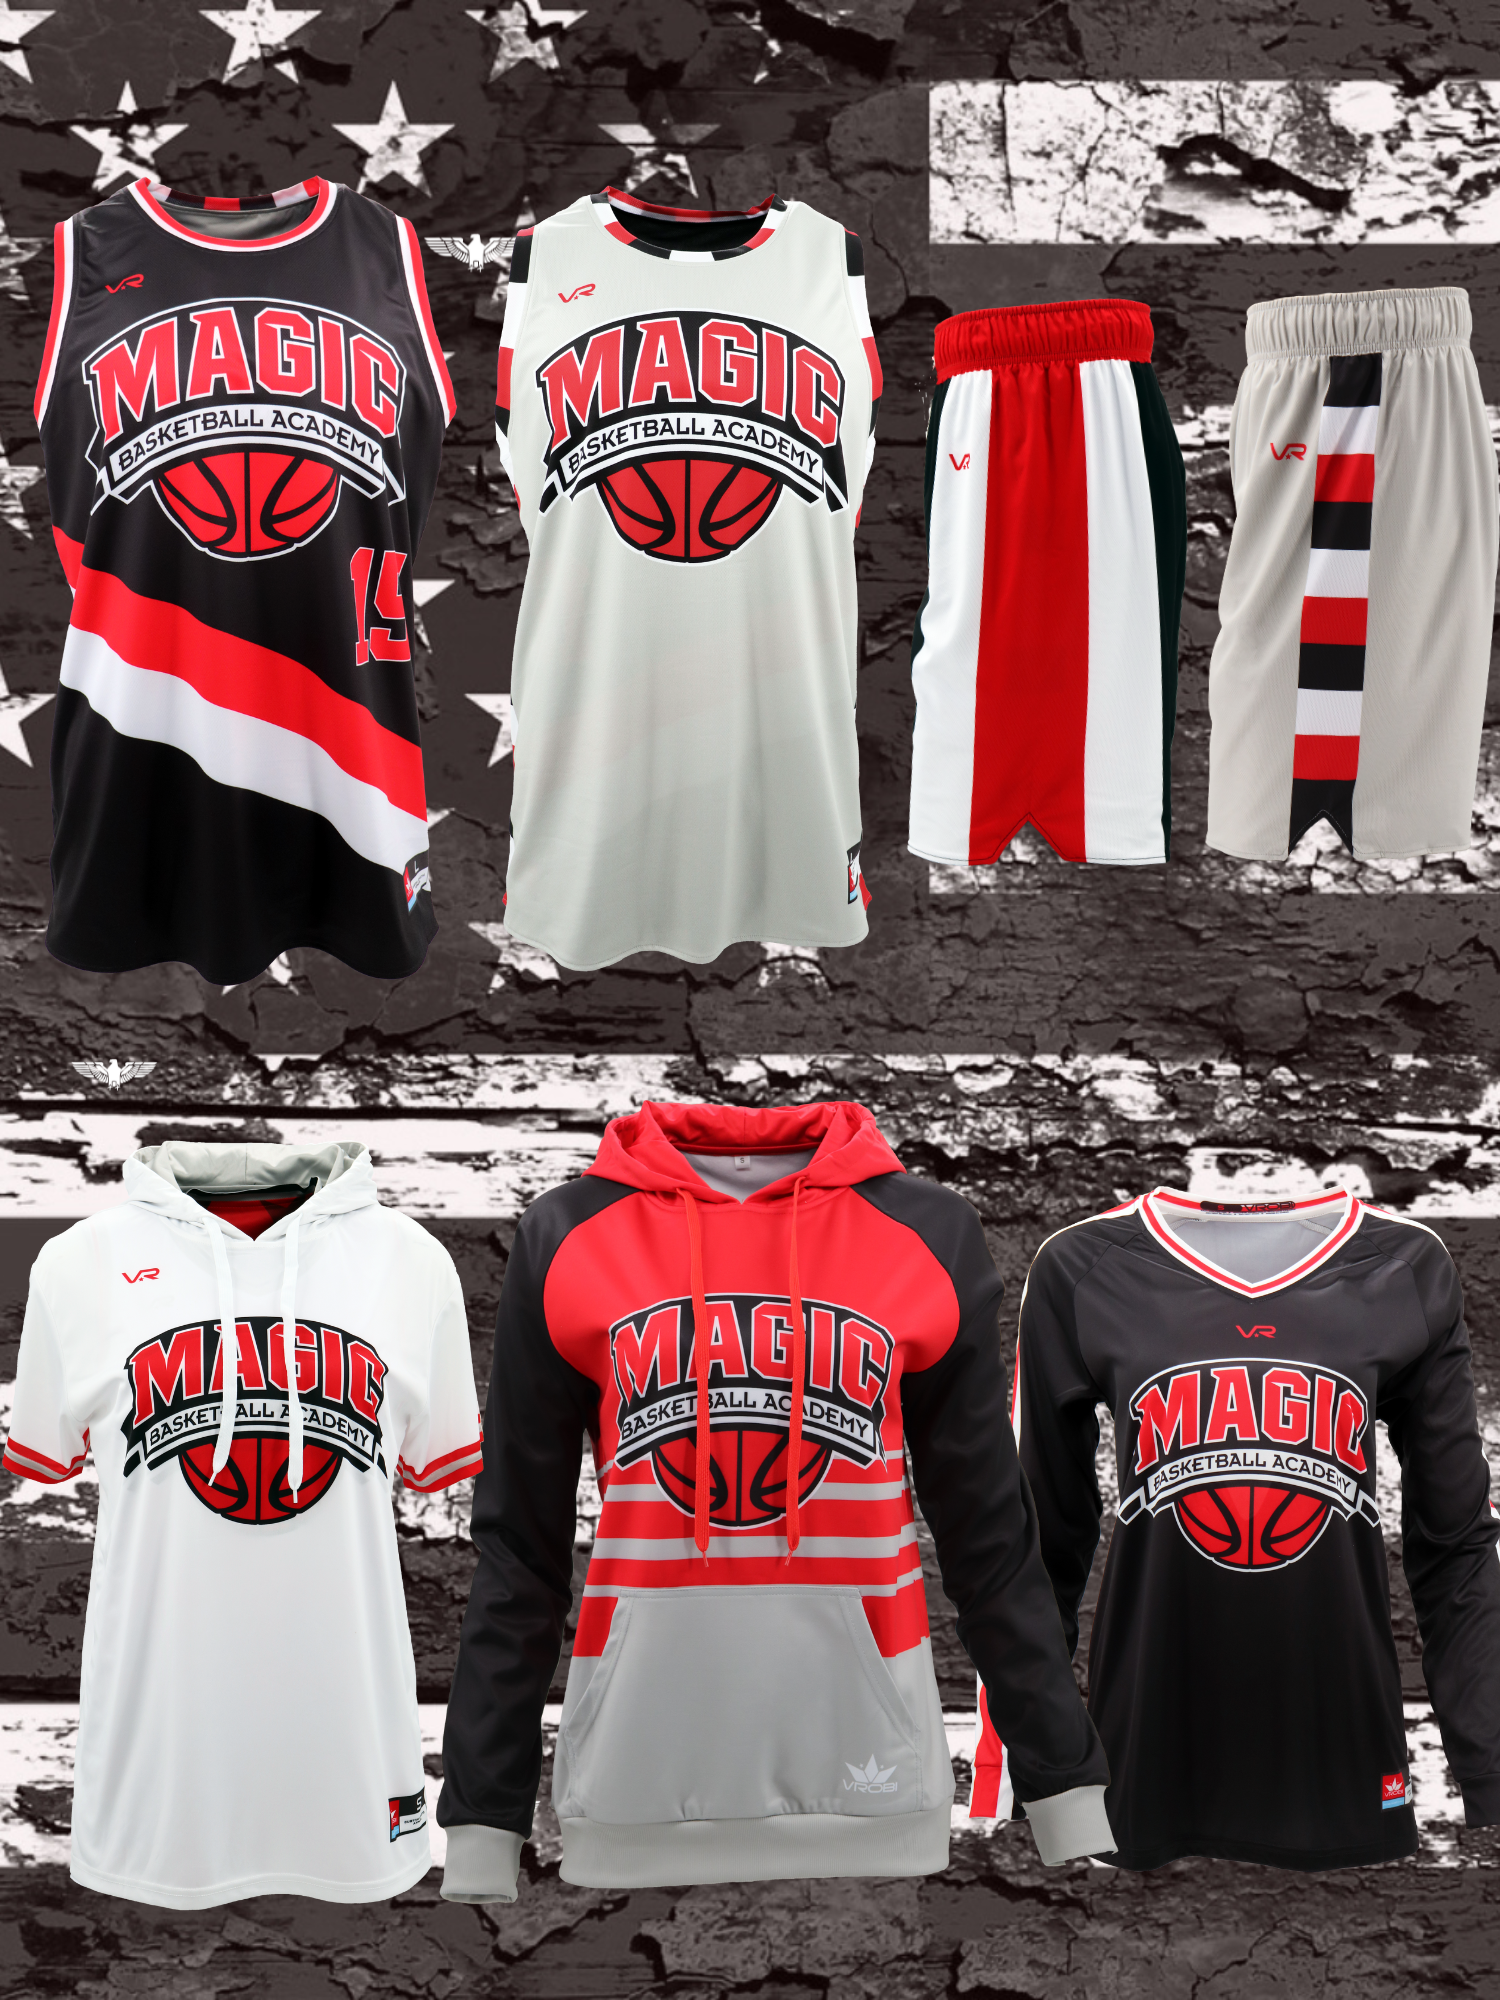 Gold Team Package for Basketball showing Jerseys, Shorts, Hoodies and Shooting Shirt